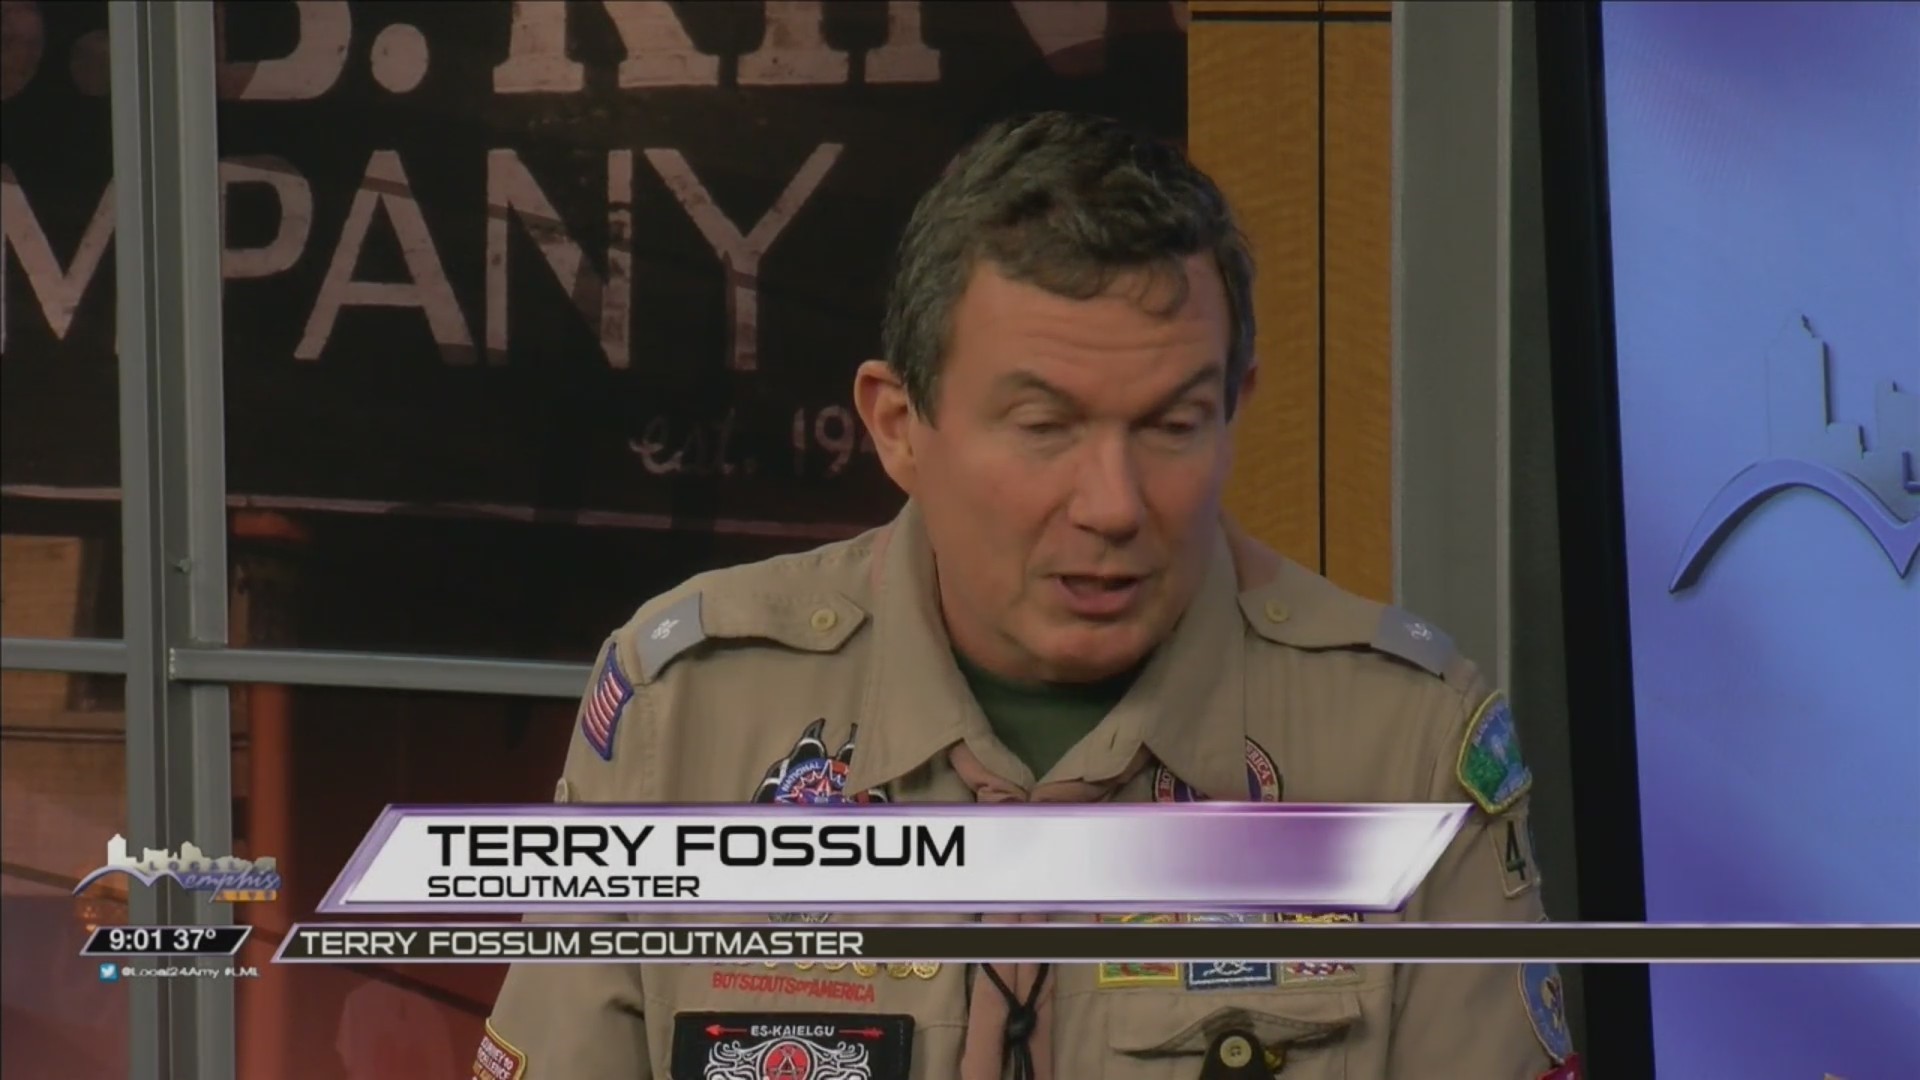 TERRY FOSSUM WITH THE BOY SCOUTS